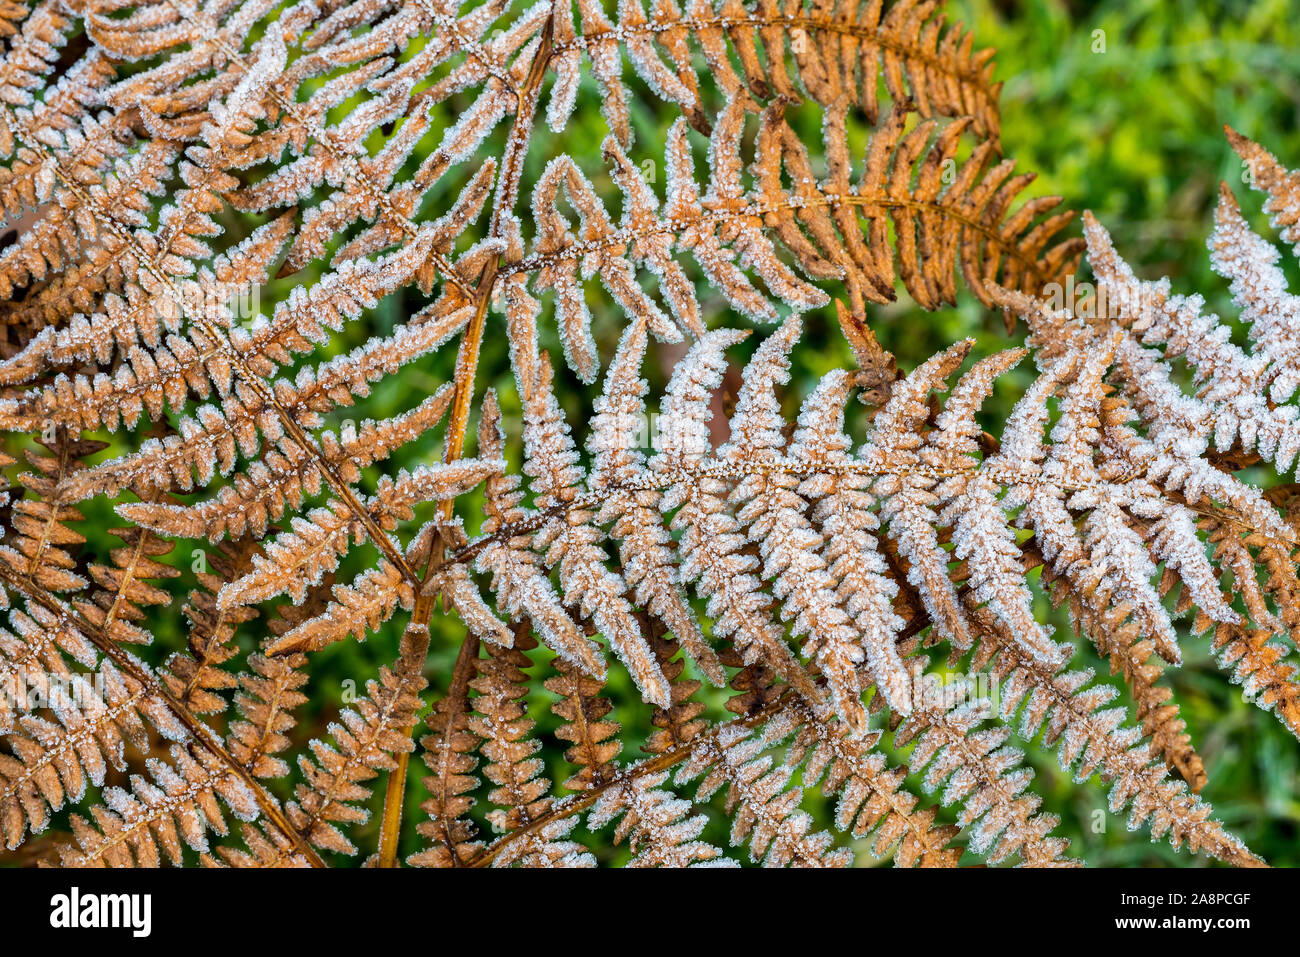 Fronds of common bracken / eagle fern (Pteridium aquilinum) covered in hoarfrost / hoar frost in autumn / fall Stock Photo